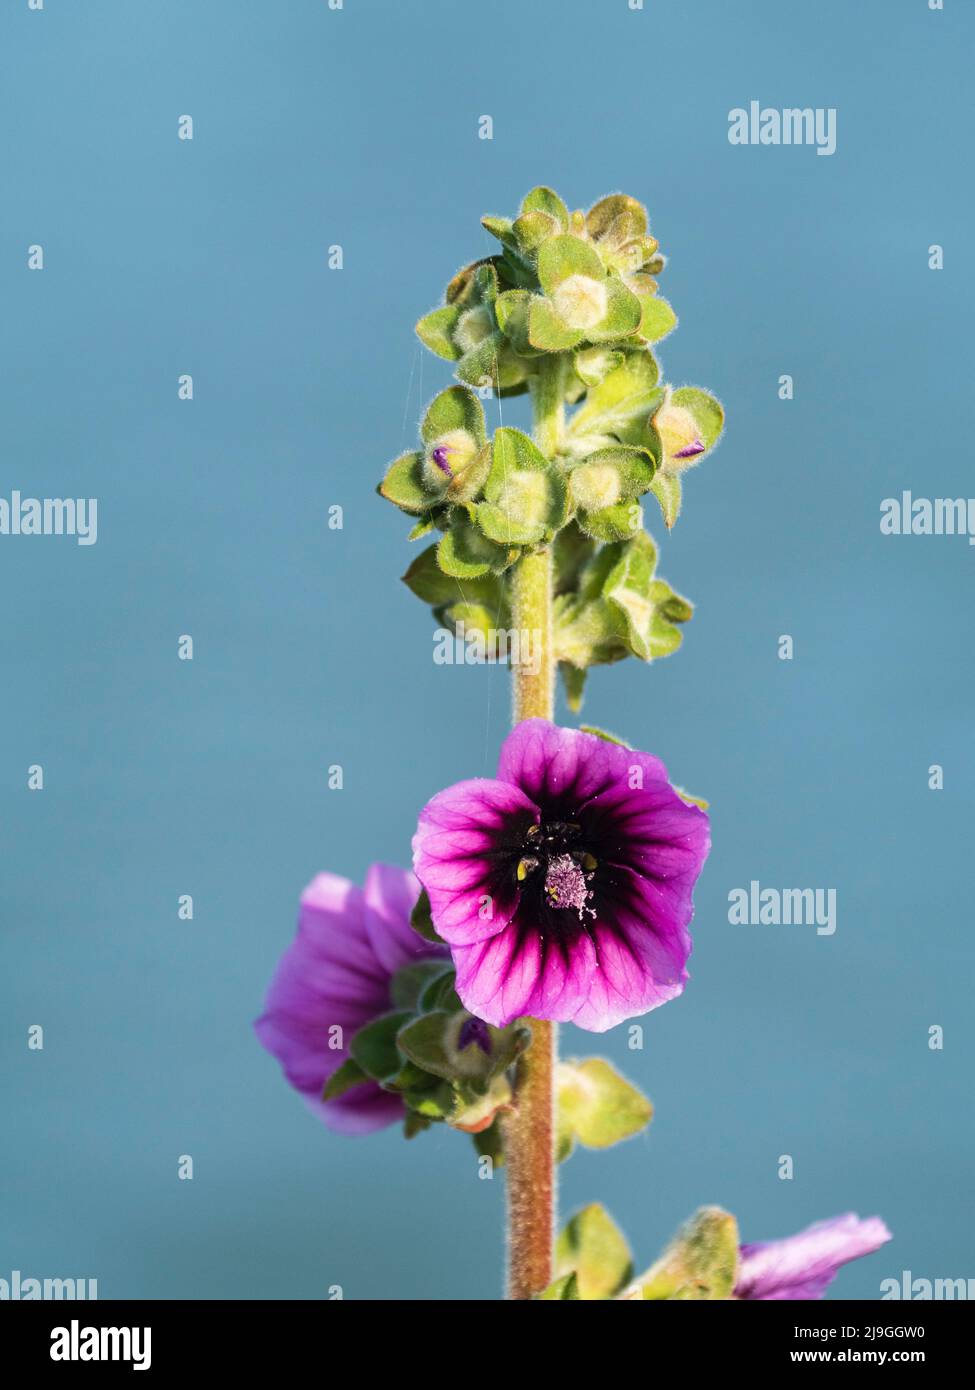 Close up of a flower stem of the tree mallow, Malva sylvestris, tree mallow, with an open dark eyed purple flower and buds Stock Photo